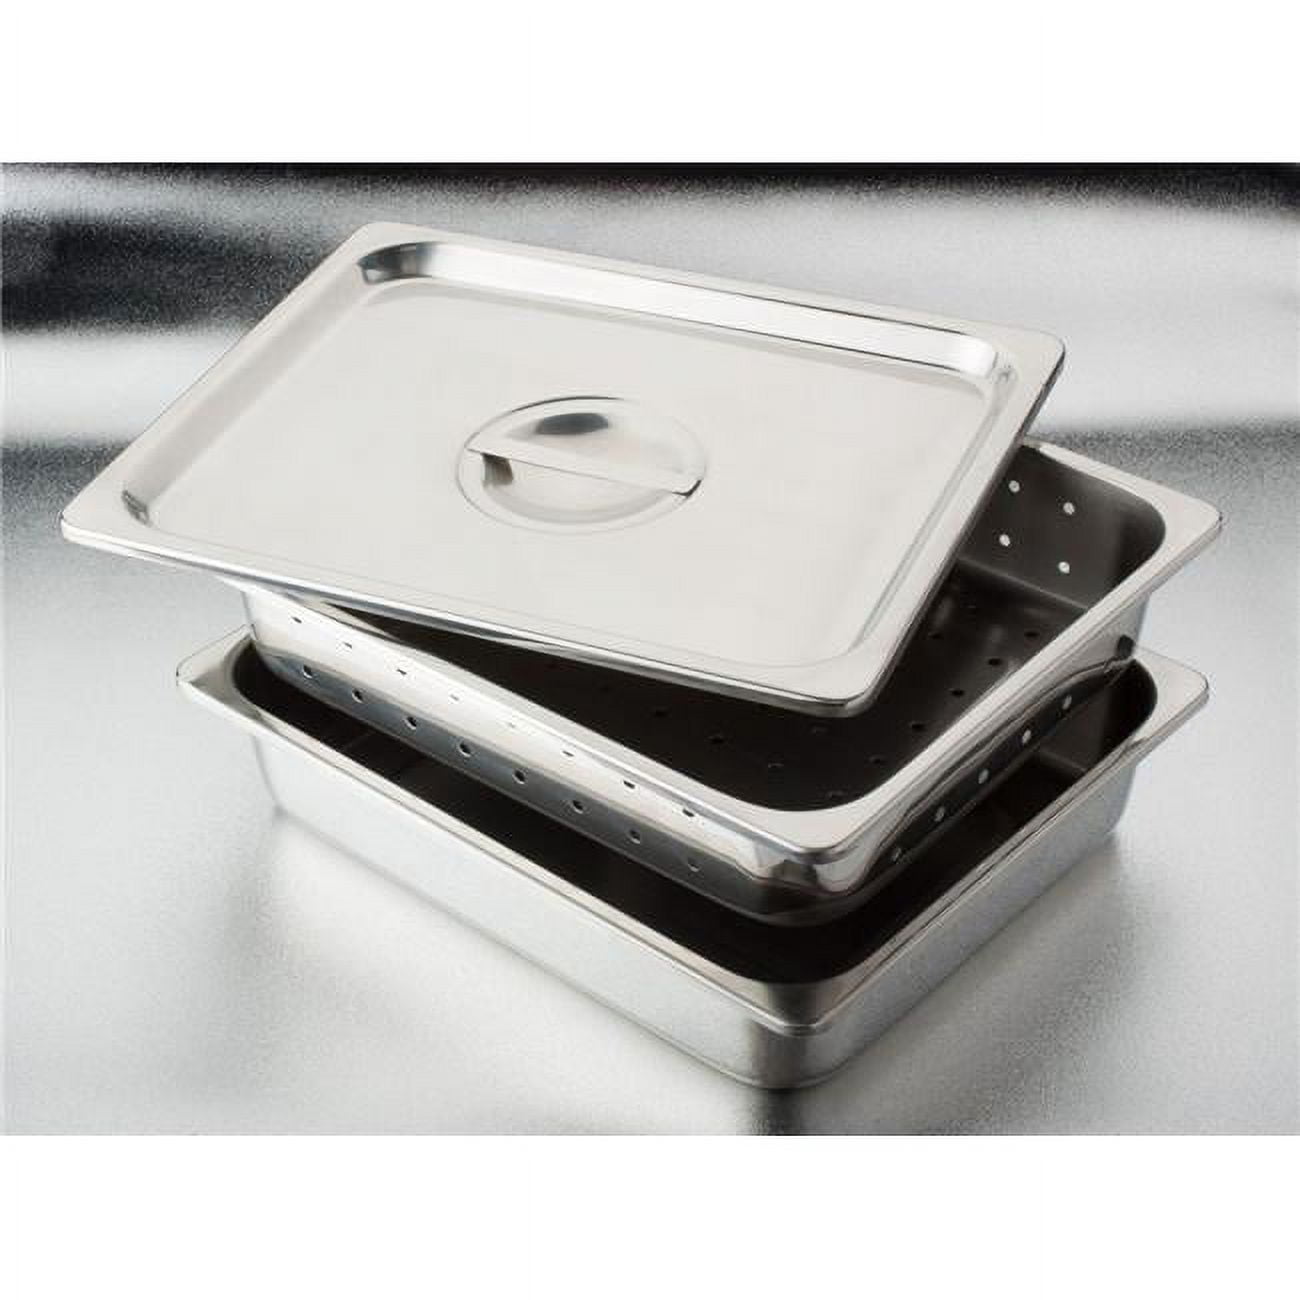 4271 12.5 X 10.75 X 4 In. Stainless Steel Instrument Tray With No Cover